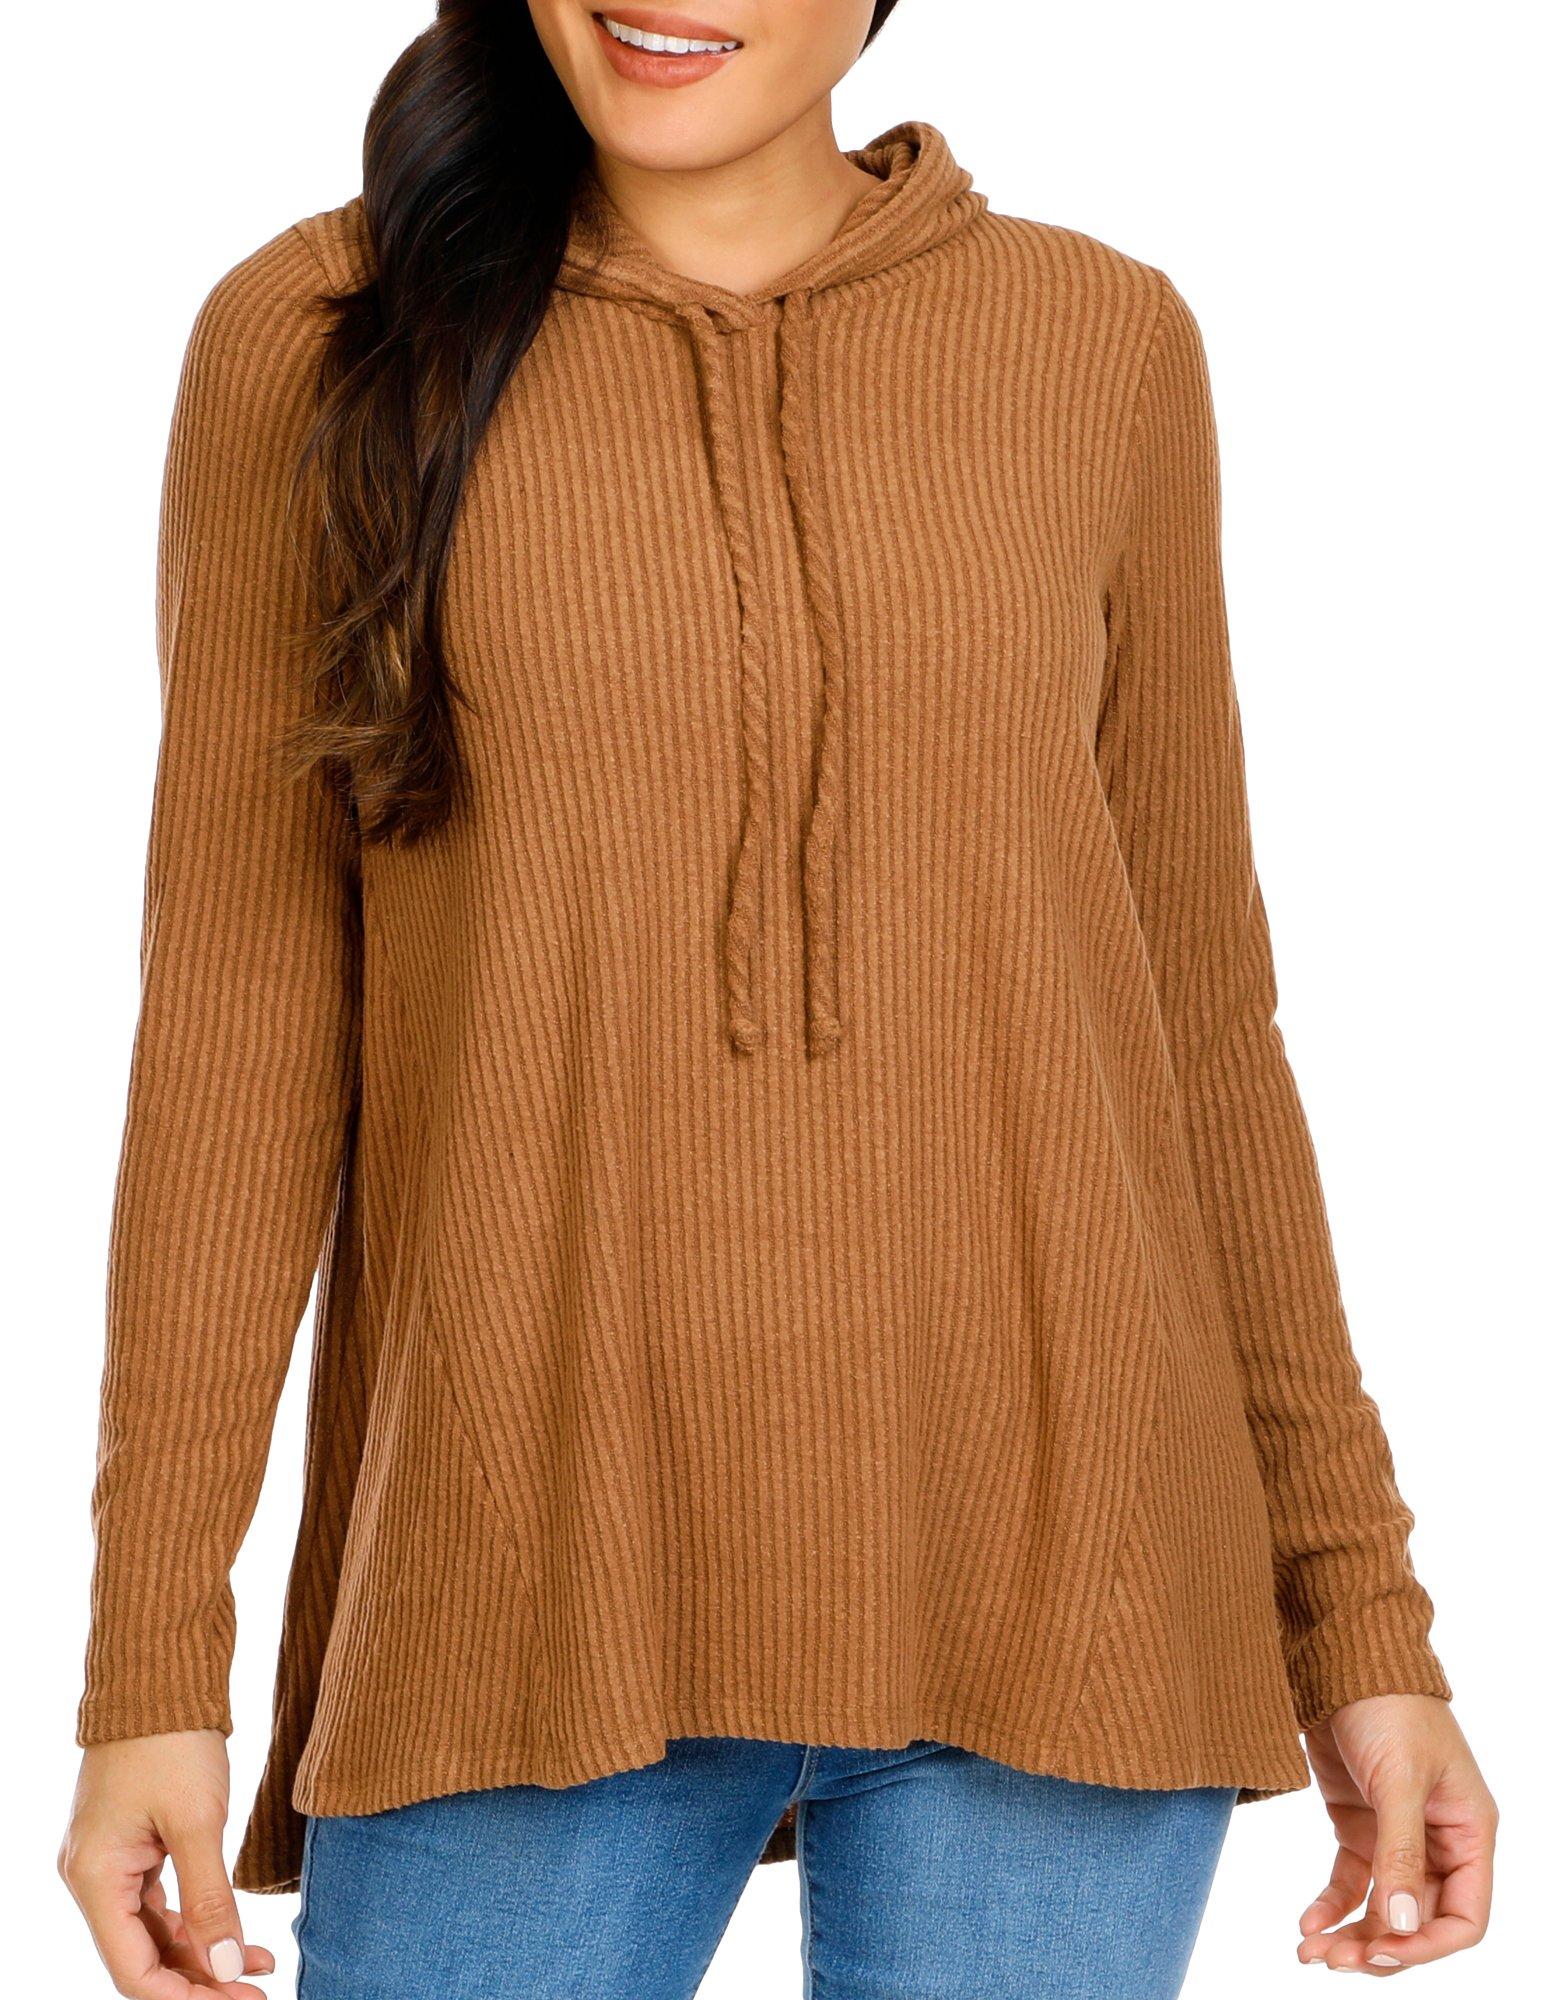 Women's Solid Waffle Hooded Top